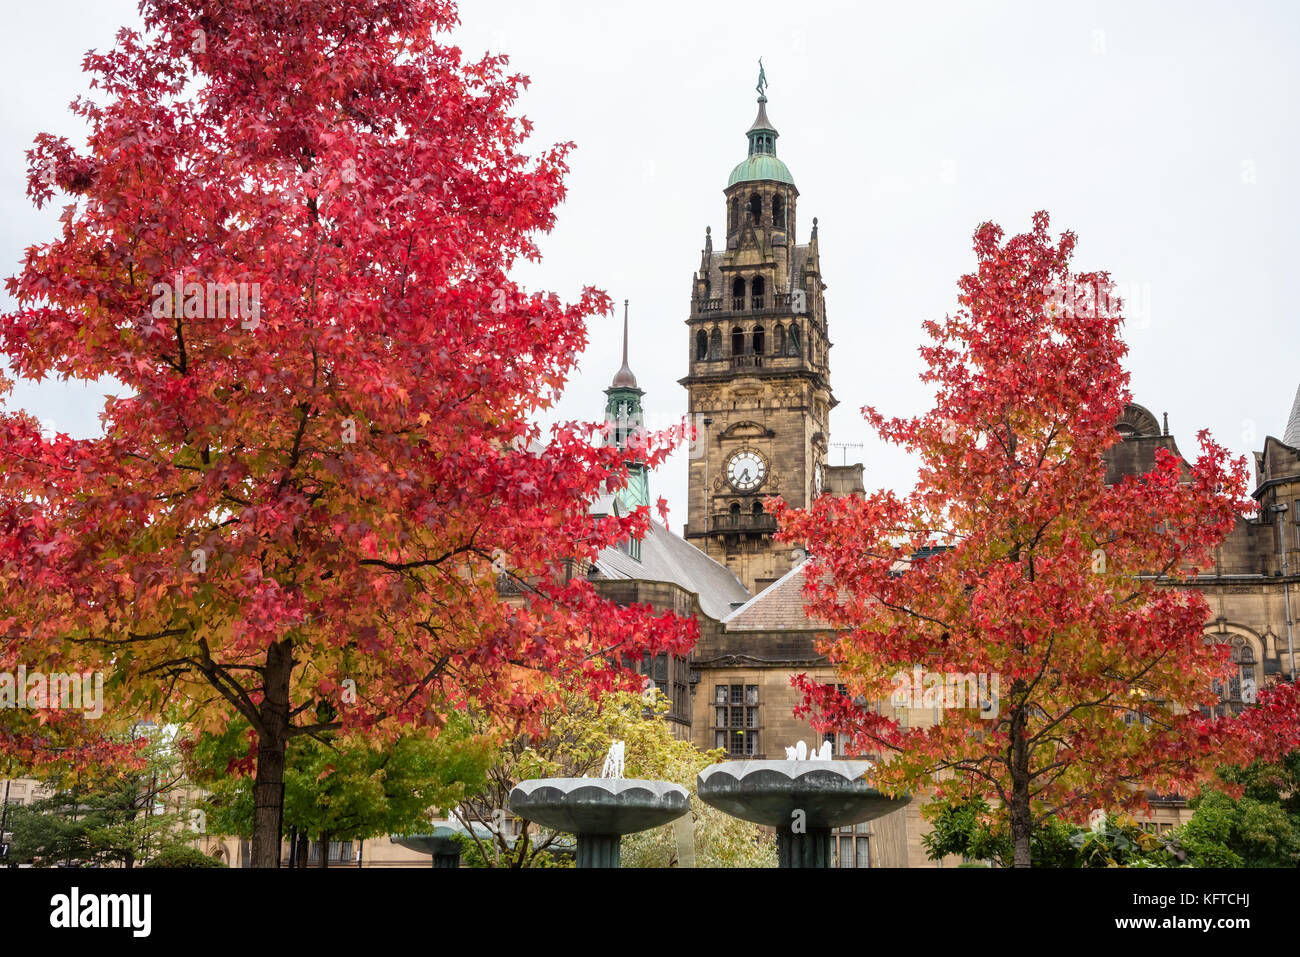 Clock tower of Sheffield town hall surrounded by red autumn color trees. Sheffield, UK. Stock Photo